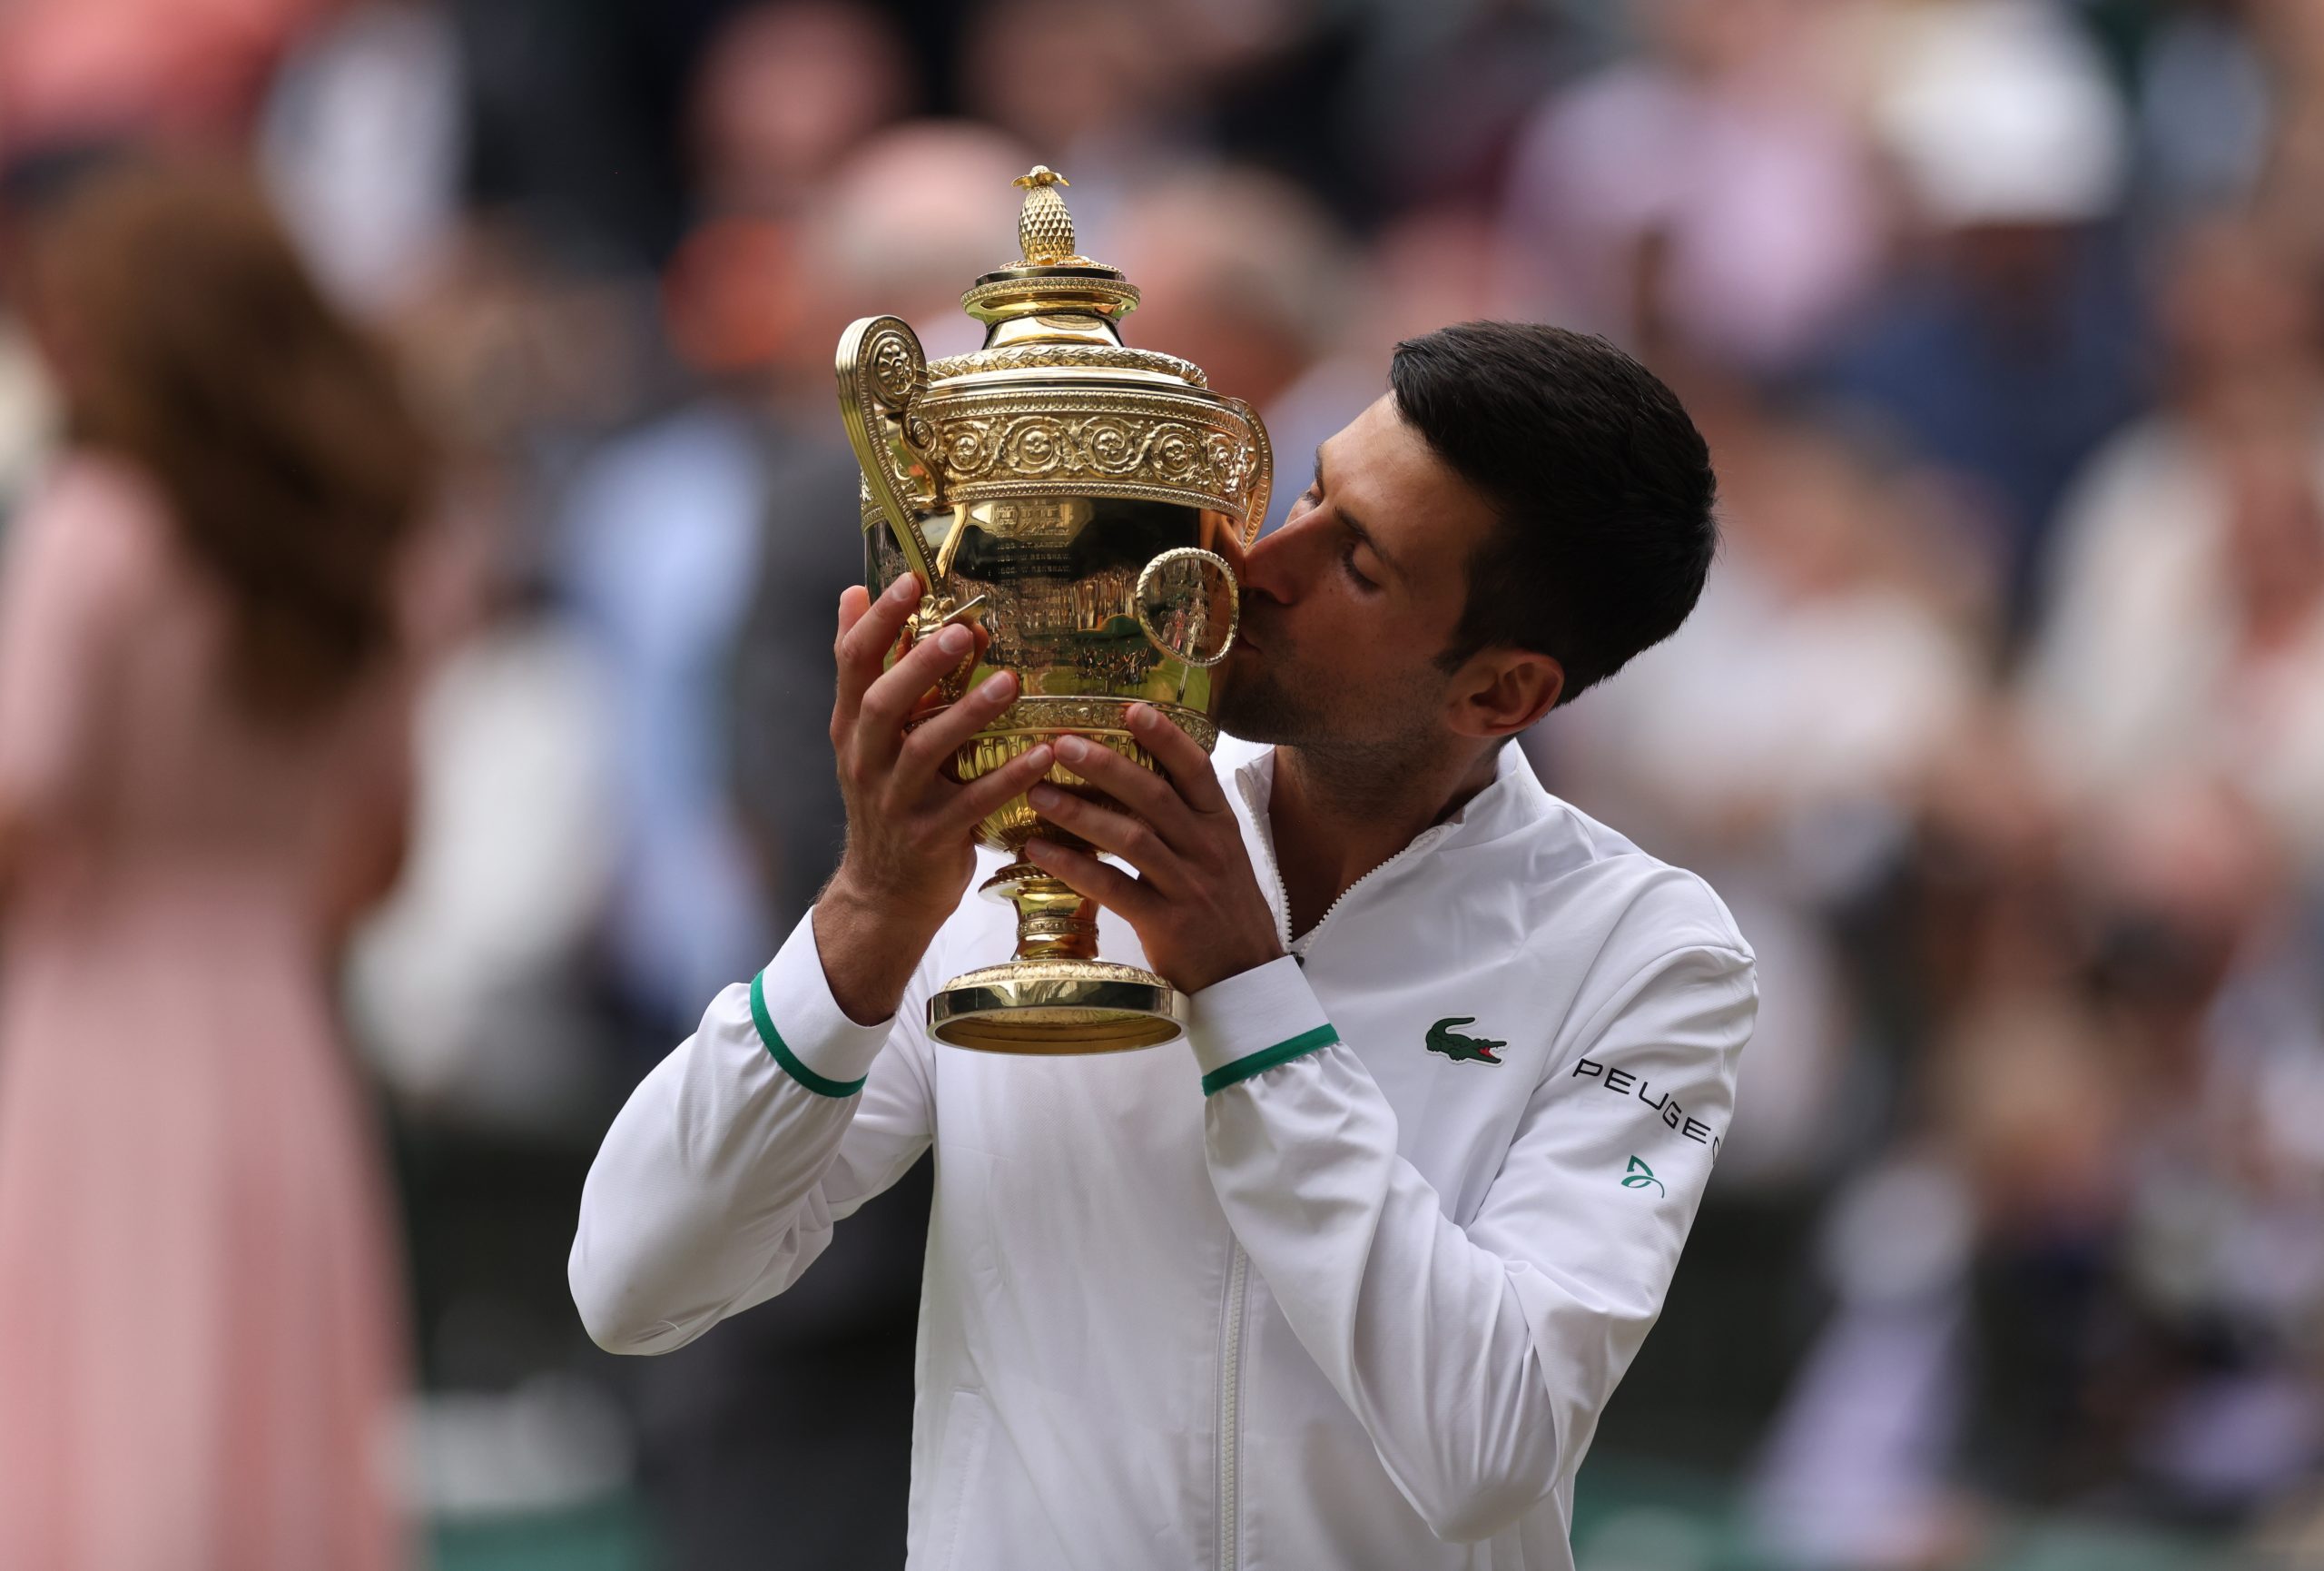 epa09337797 Novak Djokovic of Serbia poses for a photo with the trophy after winning the men's final against Matteo Berrettini of Italy at the Wimbledon Championships, Wimbledon, Britain 11 July 2021.  EPA/STEVE PASTON / POOL   EDITORIAL USE ONLY